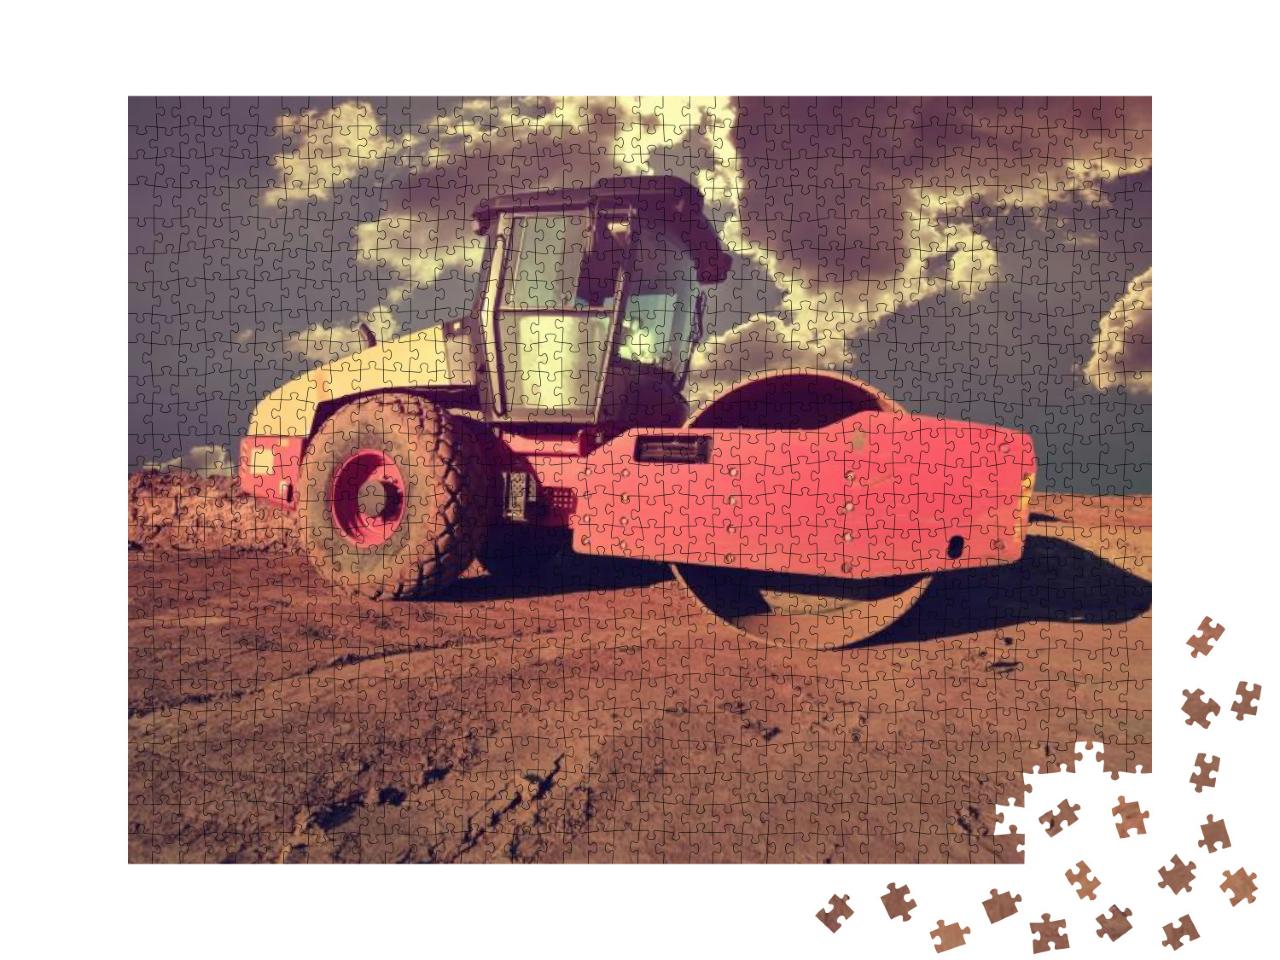 Soil Compactor for Road Works... Jigsaw Puzzle with 1000 pieces